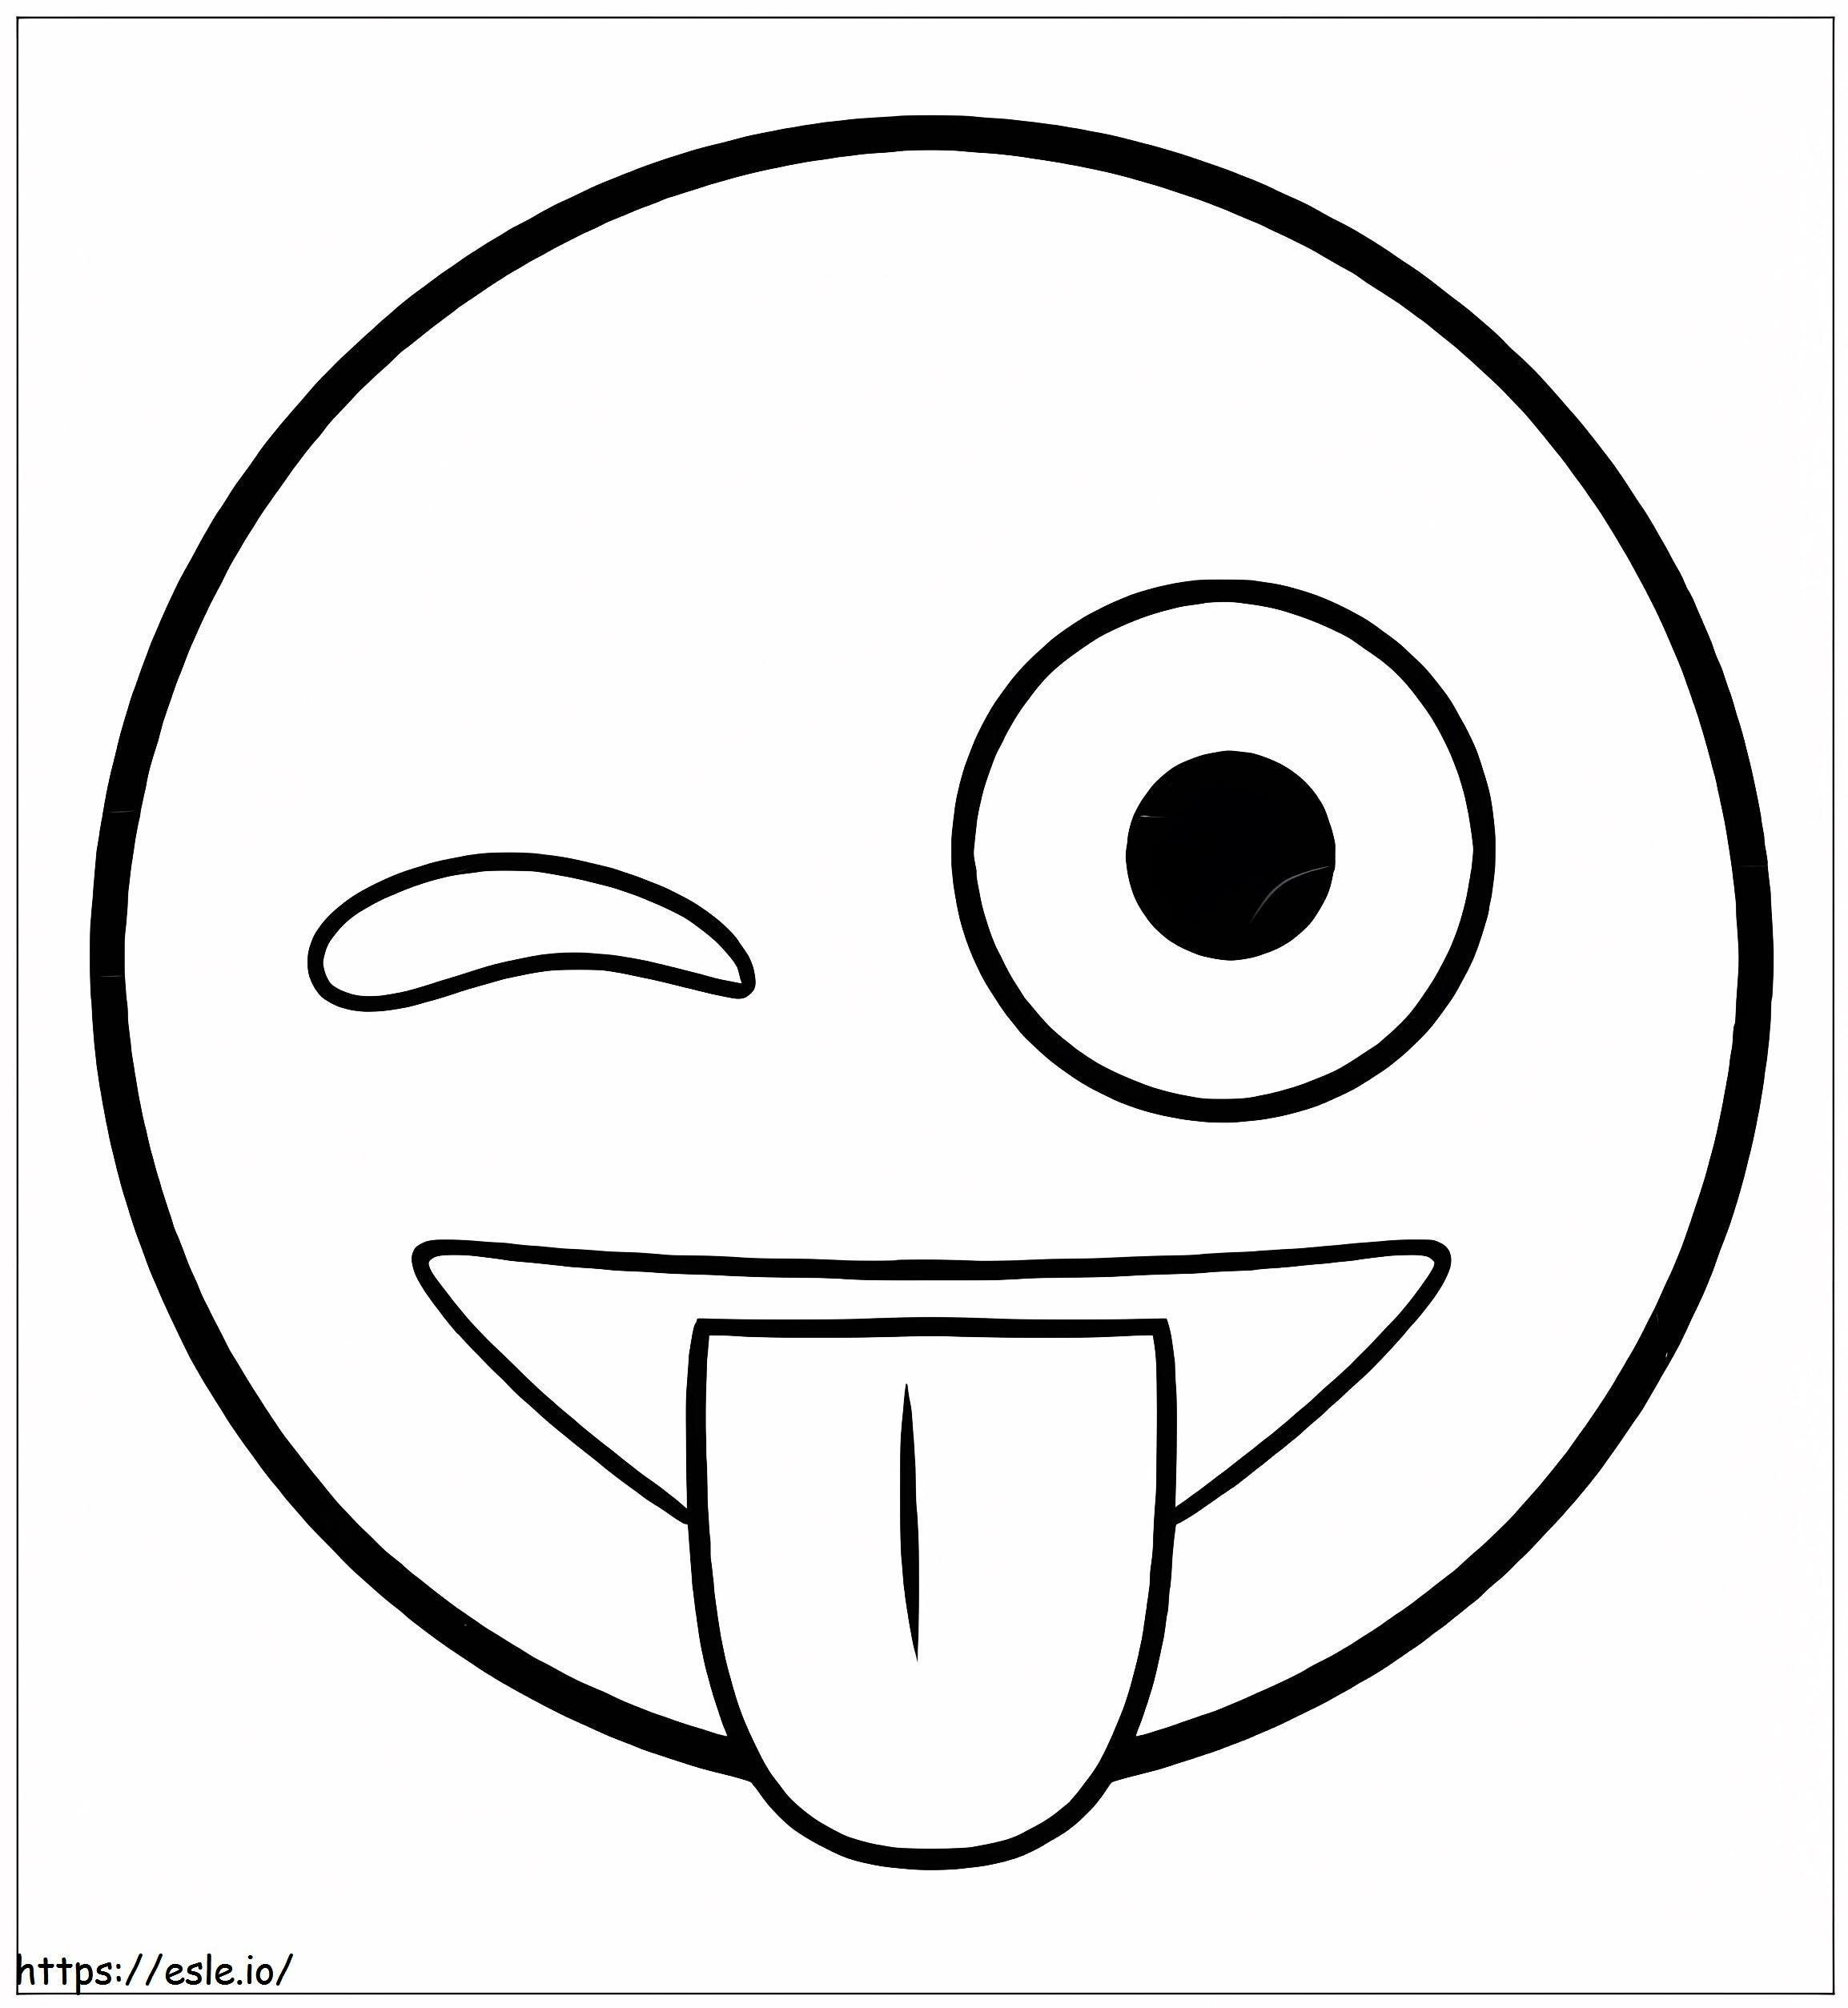 Funny Smiley Face coloring page